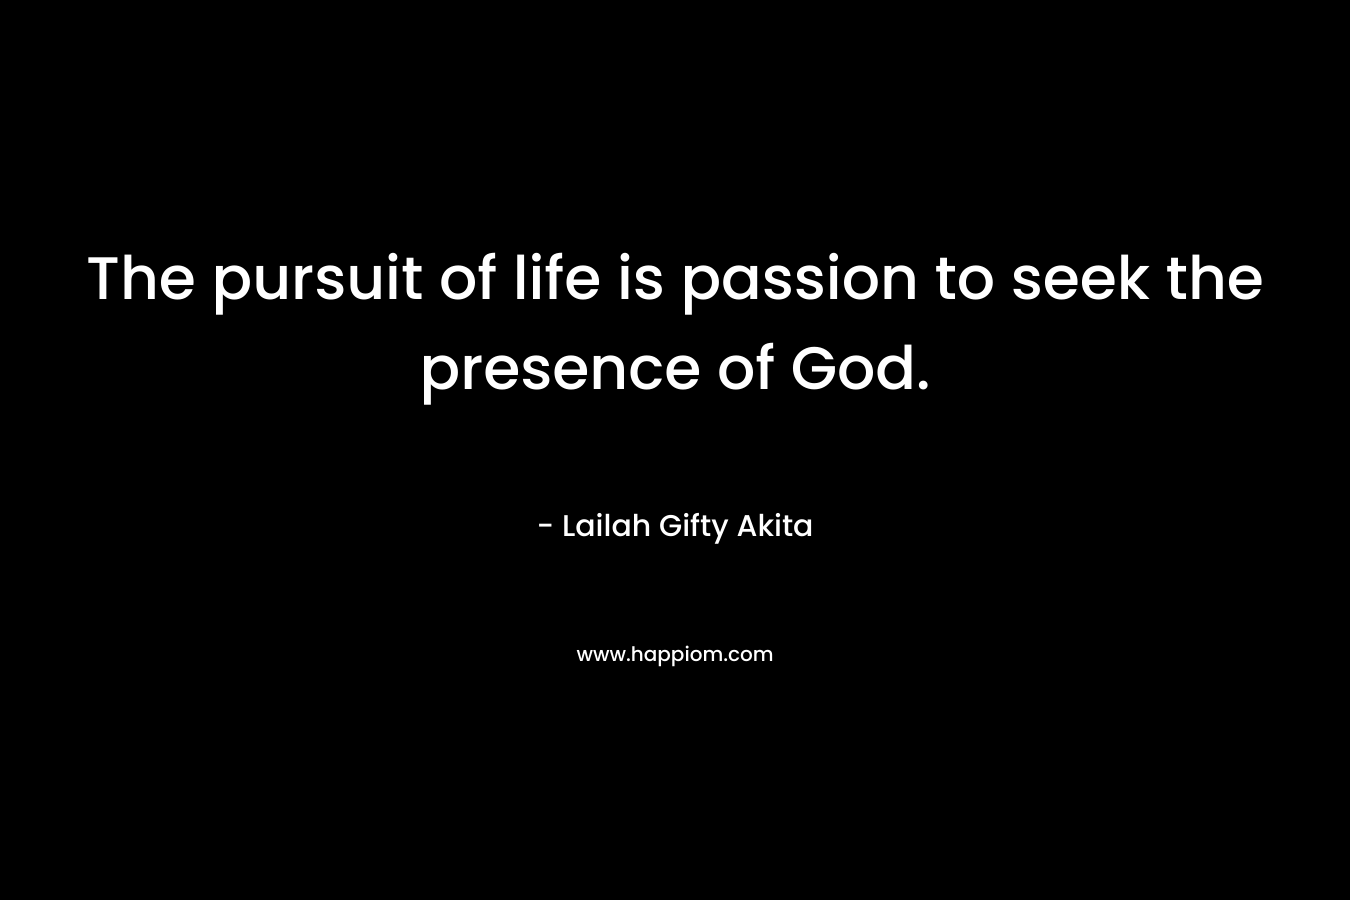 The pursuit of life is passion to seek the presence of God.